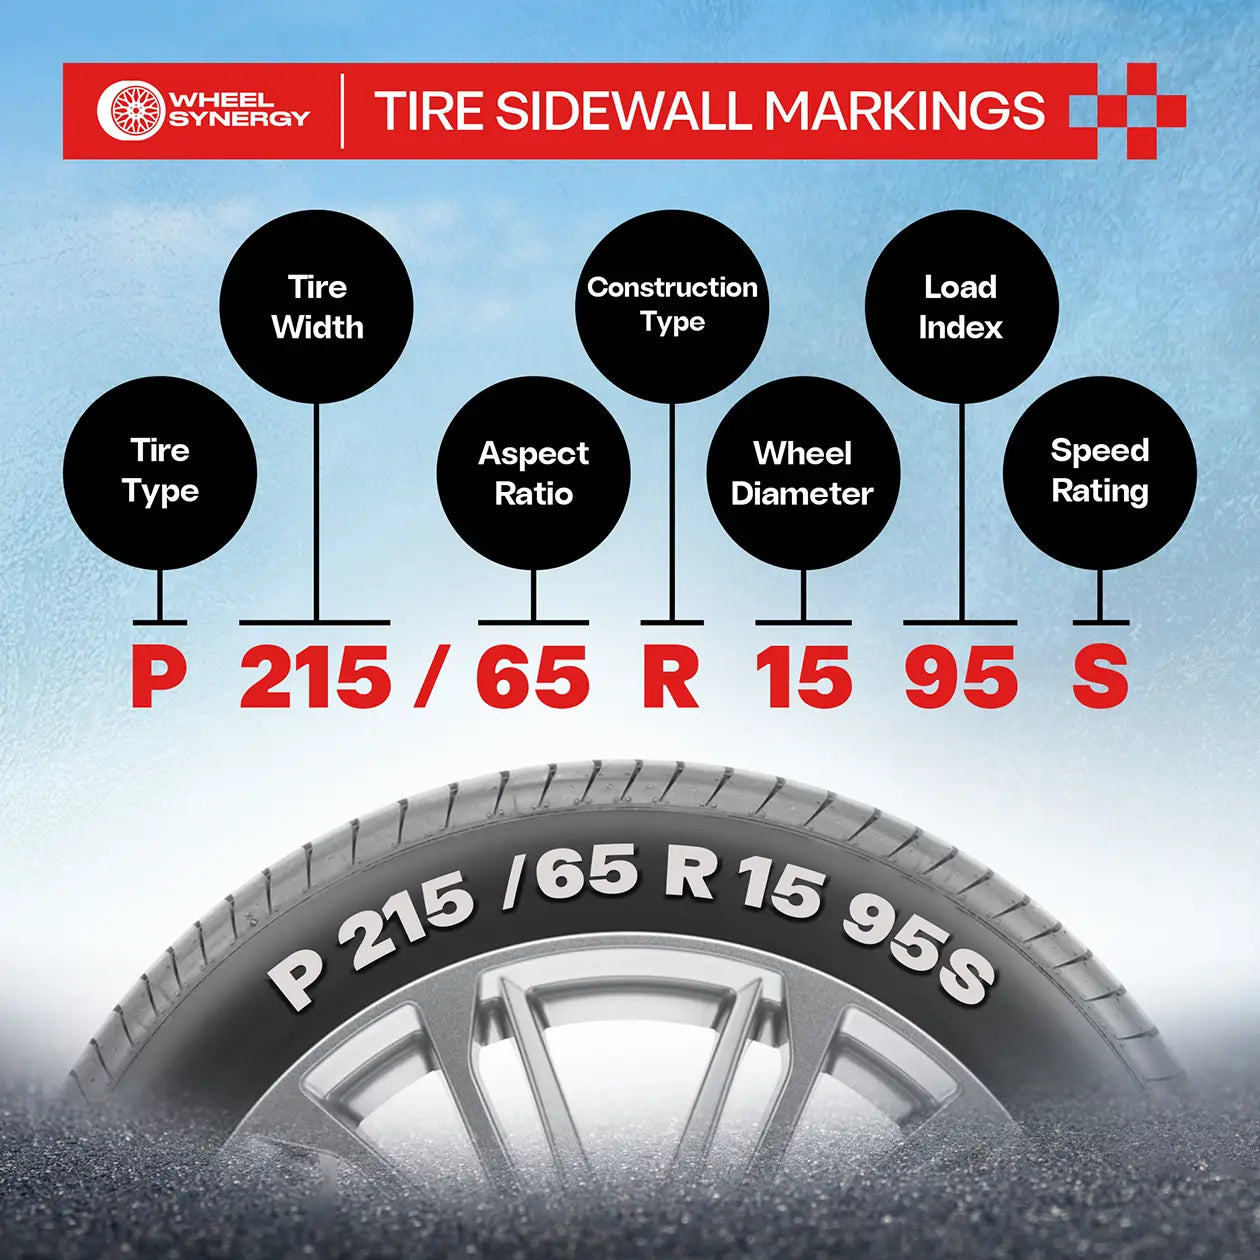 How to read a tire sidewall